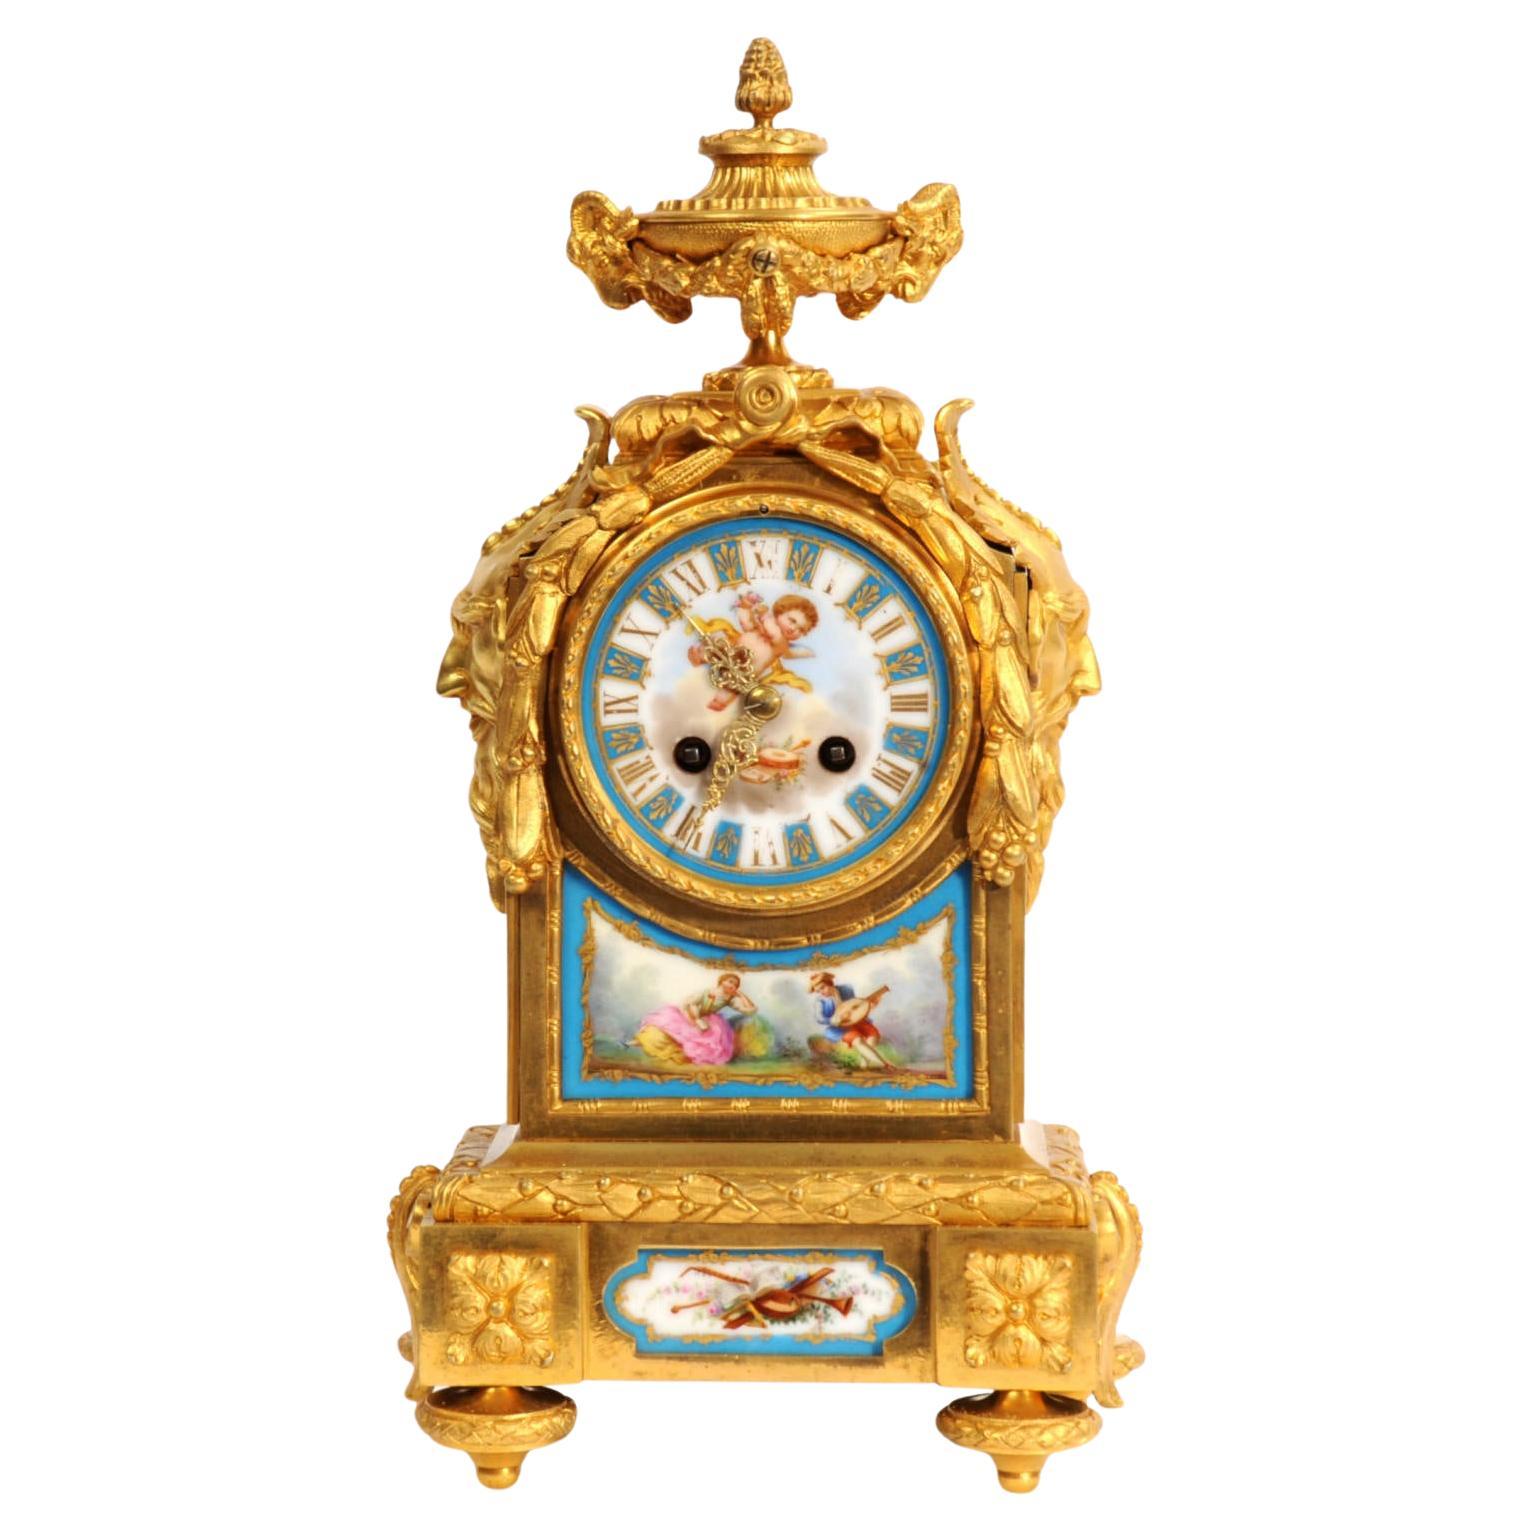 Early Ormolu and Sevres Porcelain Antique French Clock - Japy Fils Fully Working For Sale